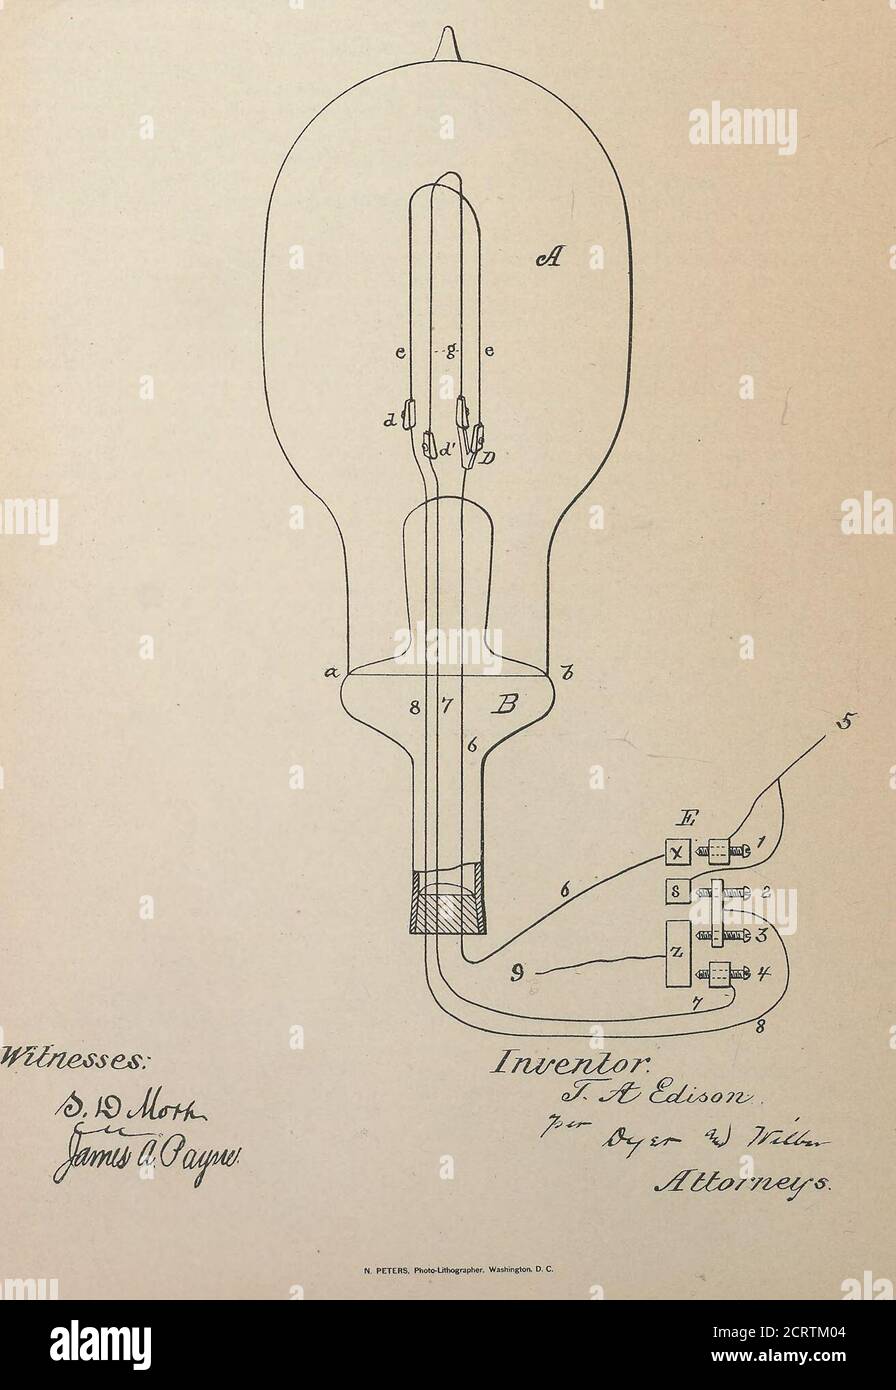 . Collection of United States patents granted to Thomas A. Edison, 1869-1884 . f the field-mag-net, provided with a conical opening, of a coni-cal block adjustable in and out of said, opening,substantially as set forth. 20 3. In adynamo or magneto electric machine, the field-of-force magnet, the yoke of which hasan adjustable portion acting as a magnetic-cir-cuit regulator, in combination with means op-erated by the current generated for automati-cally adjusting said adjustable portion, sub- 2stantially as set forth. 4. The combination, with the yoke of thefield-magnet of a dynamo or magneto e Stock Photo